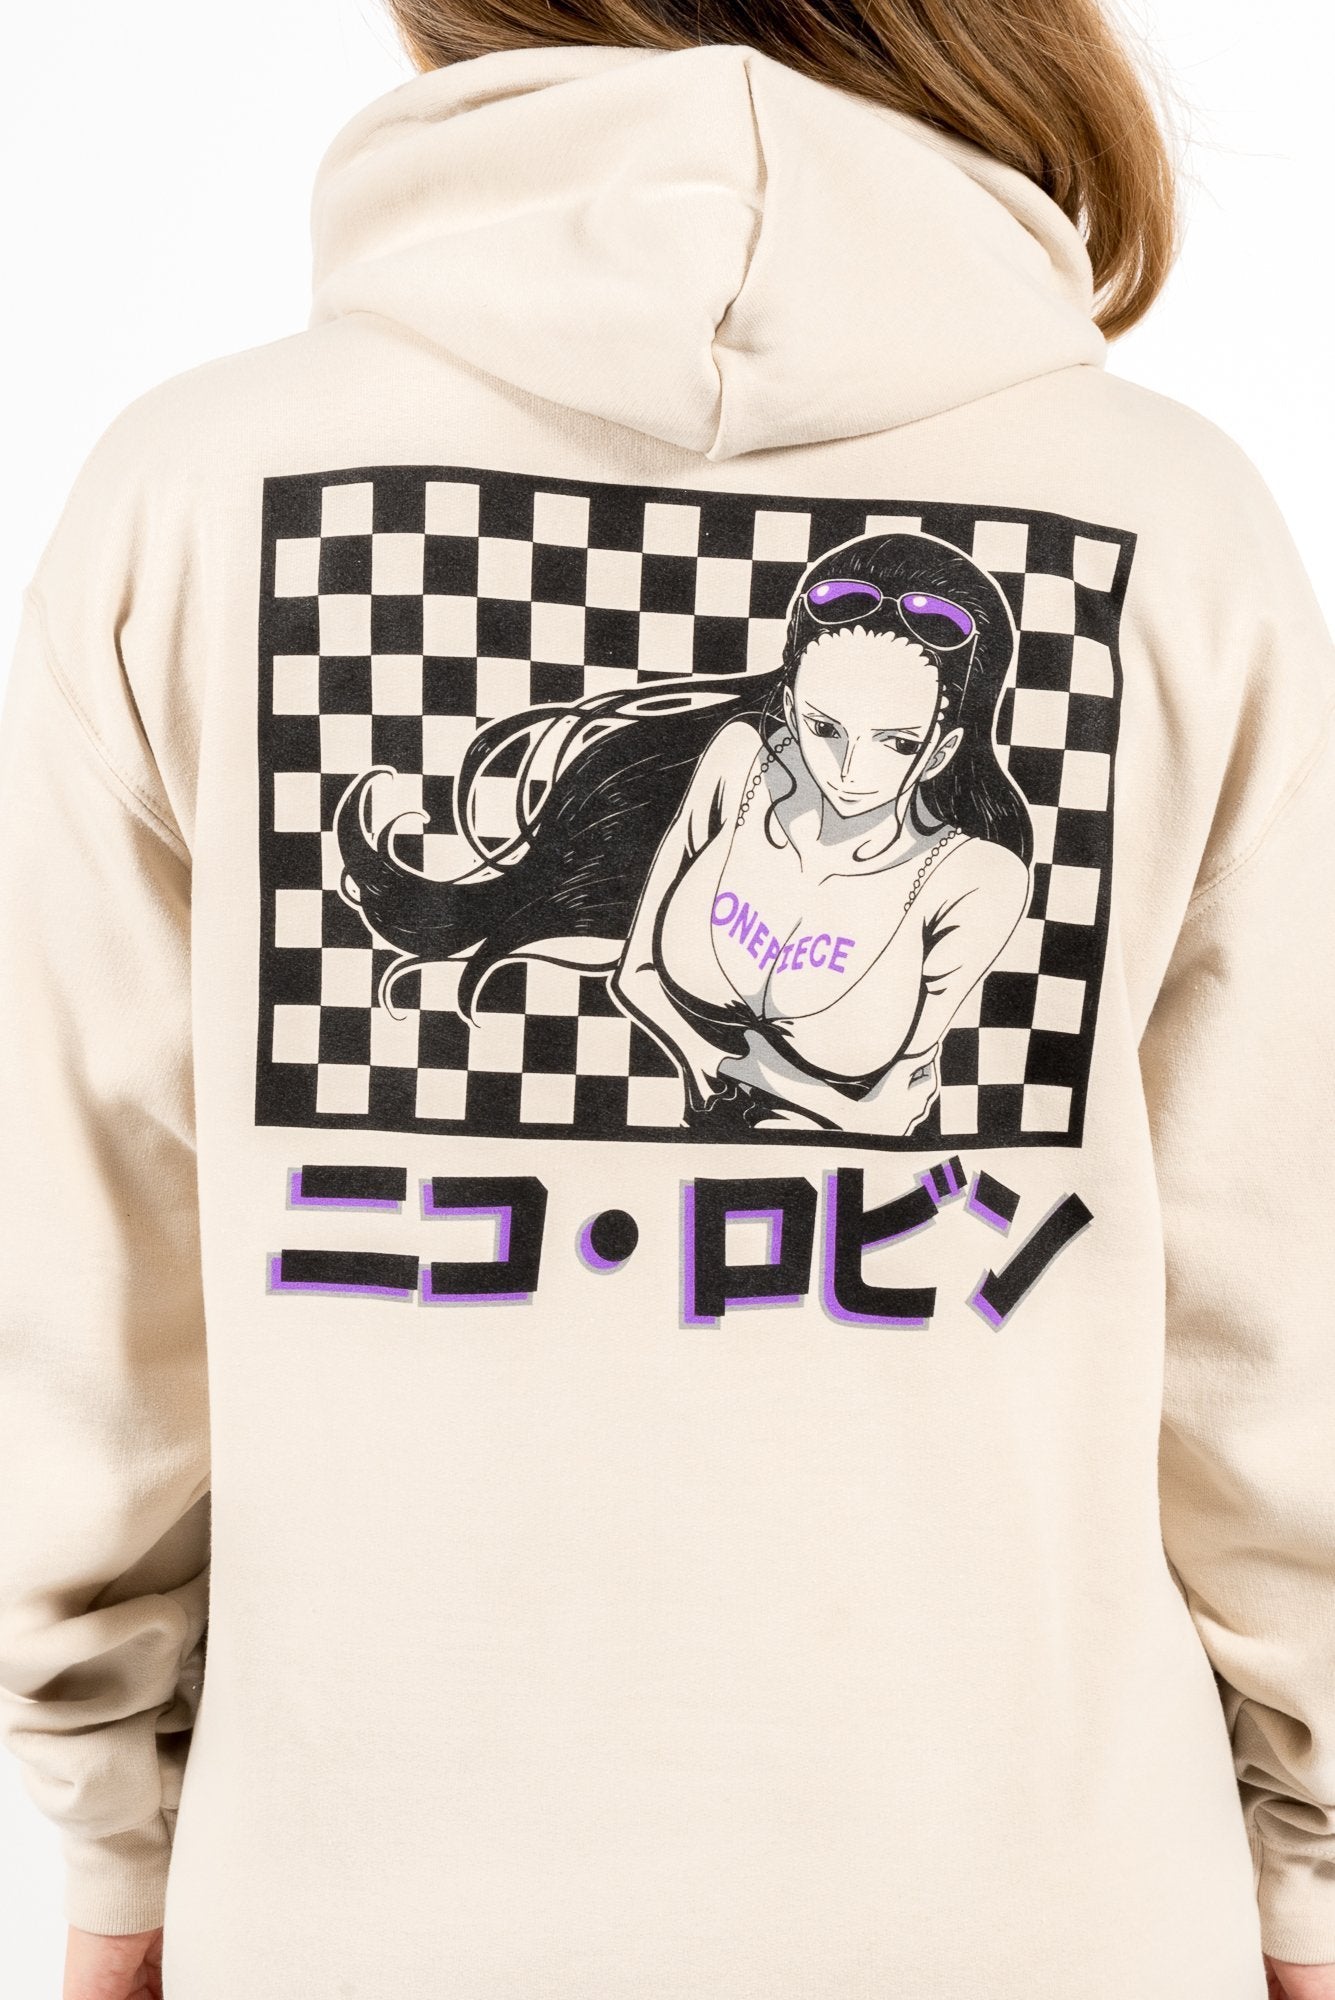 One Piece - Nico Robin Checker Hoodie - Crunchyroll Exclusive! image count 4